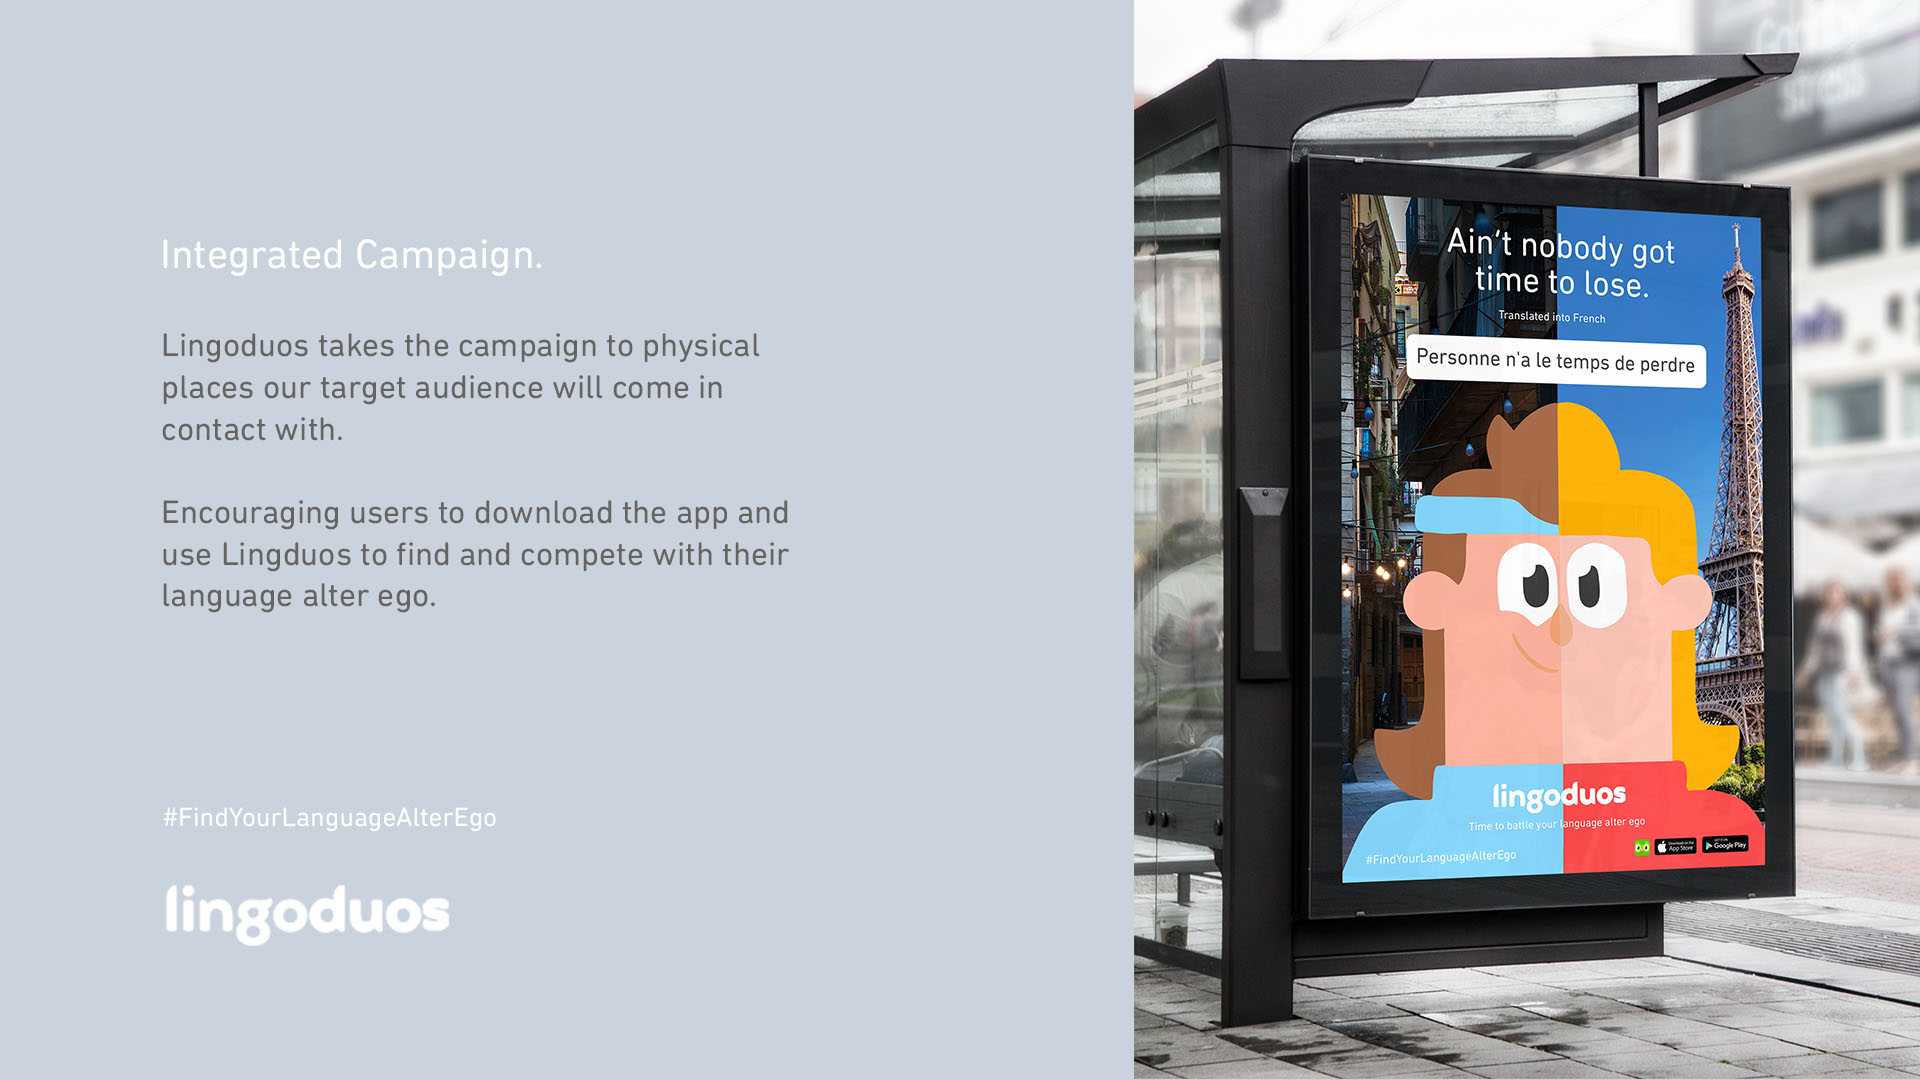 Physical Campaign Activation